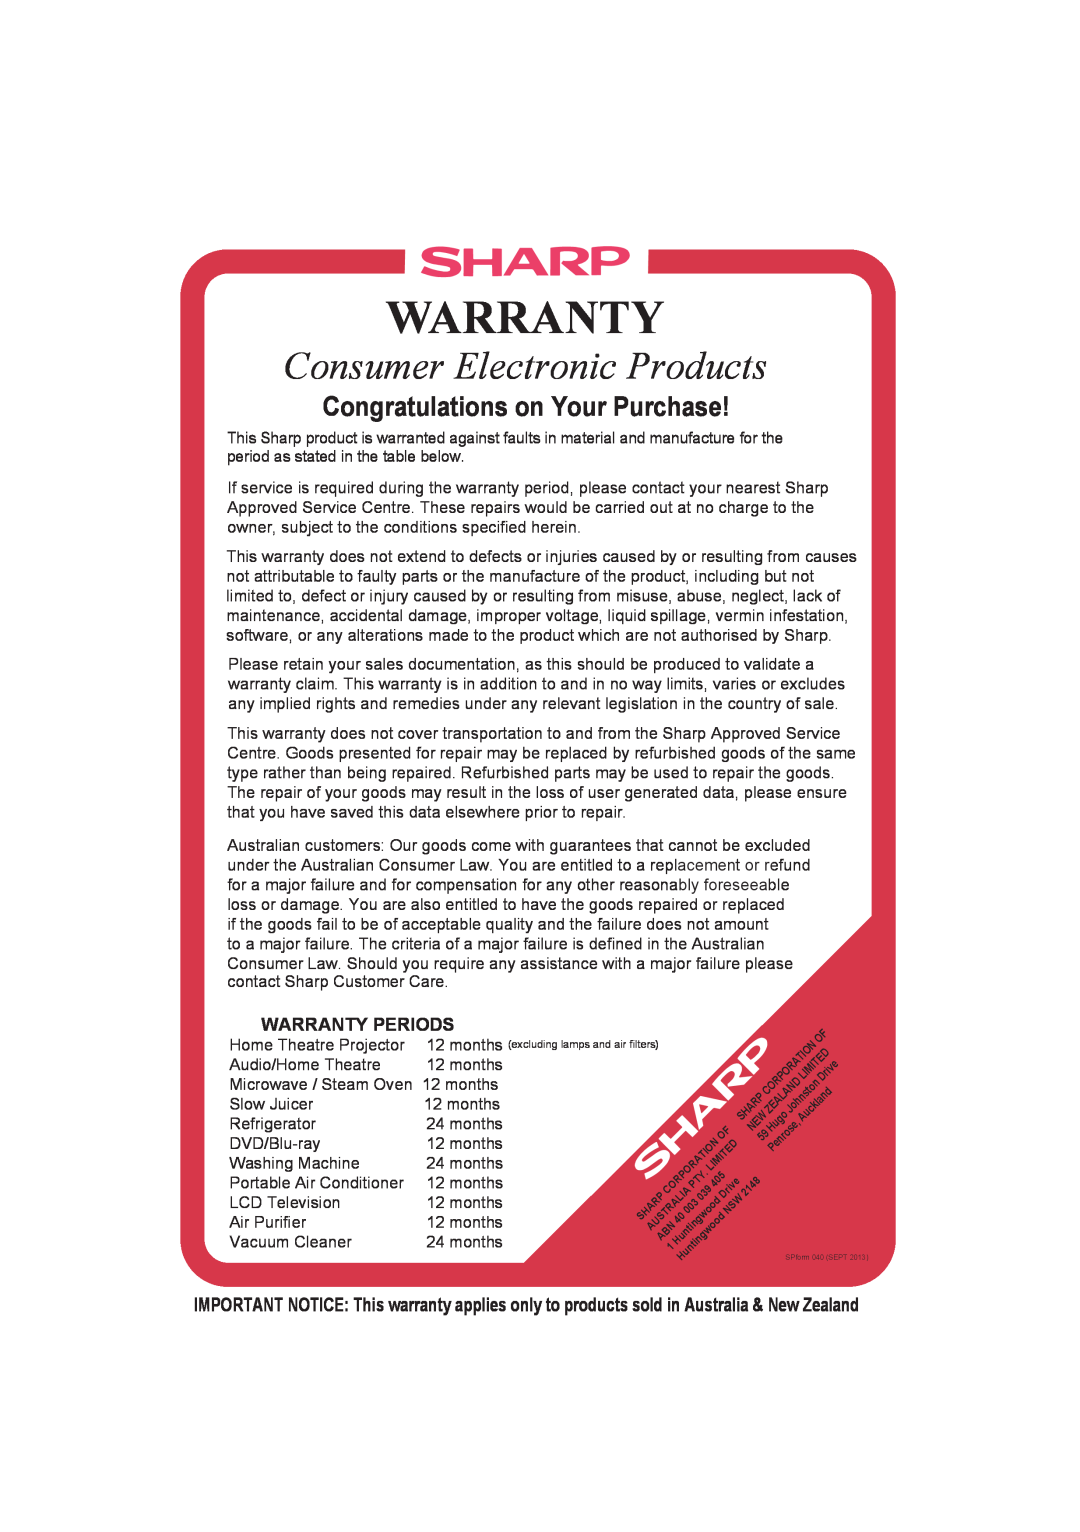 Sharp R-890N operation manual Consumer Electronic Products, Congratulations on Your Purchase, Warranty Periods 